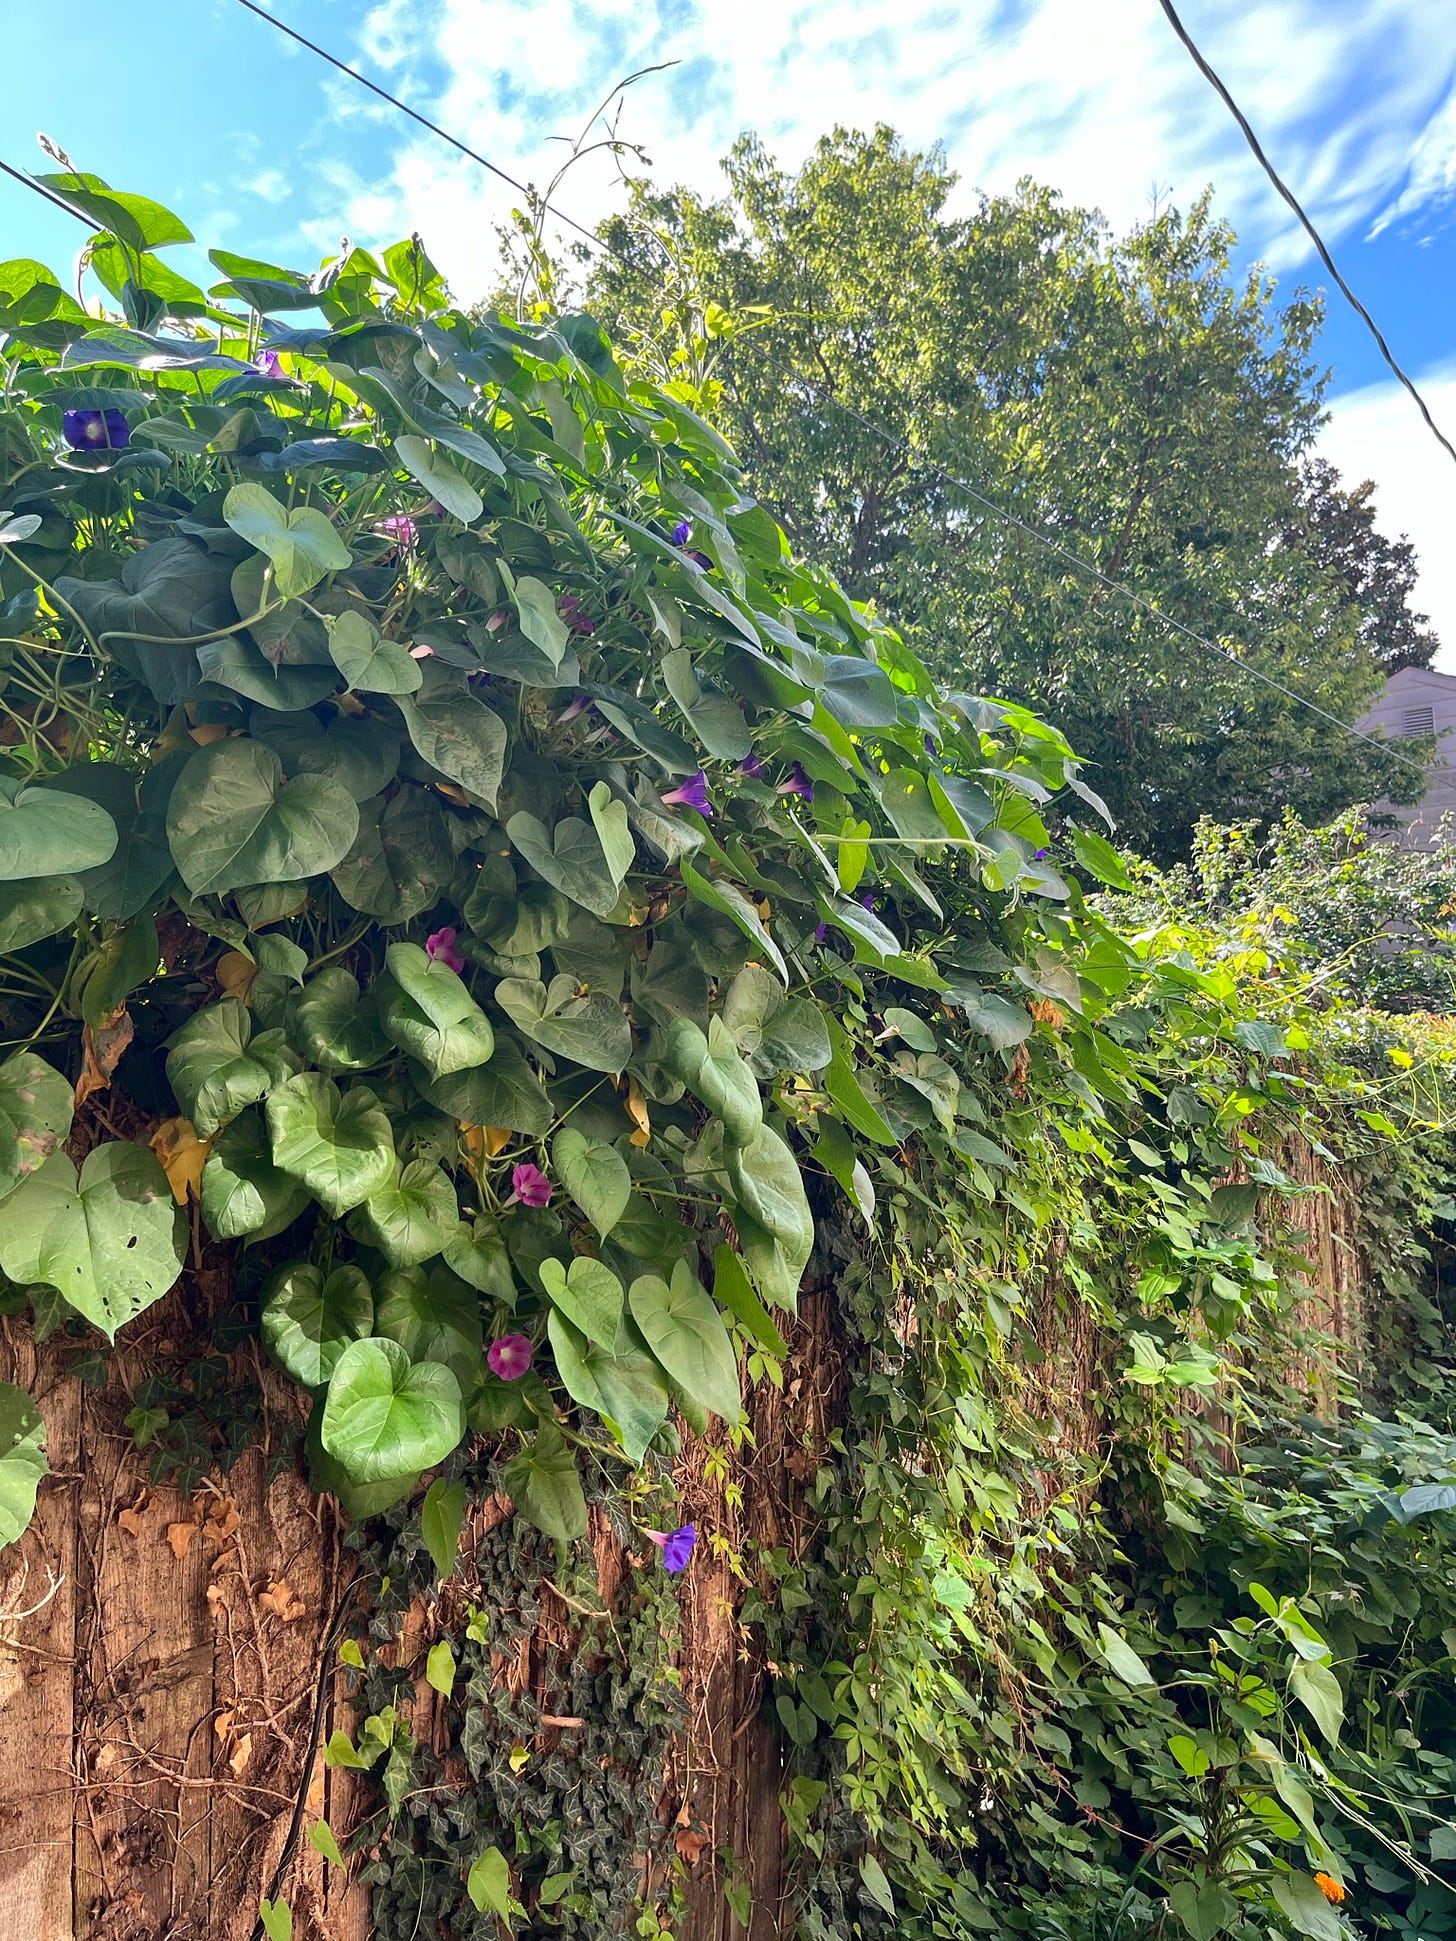 A big mass of vining plants climbing over a fence and into Robyn's yard.